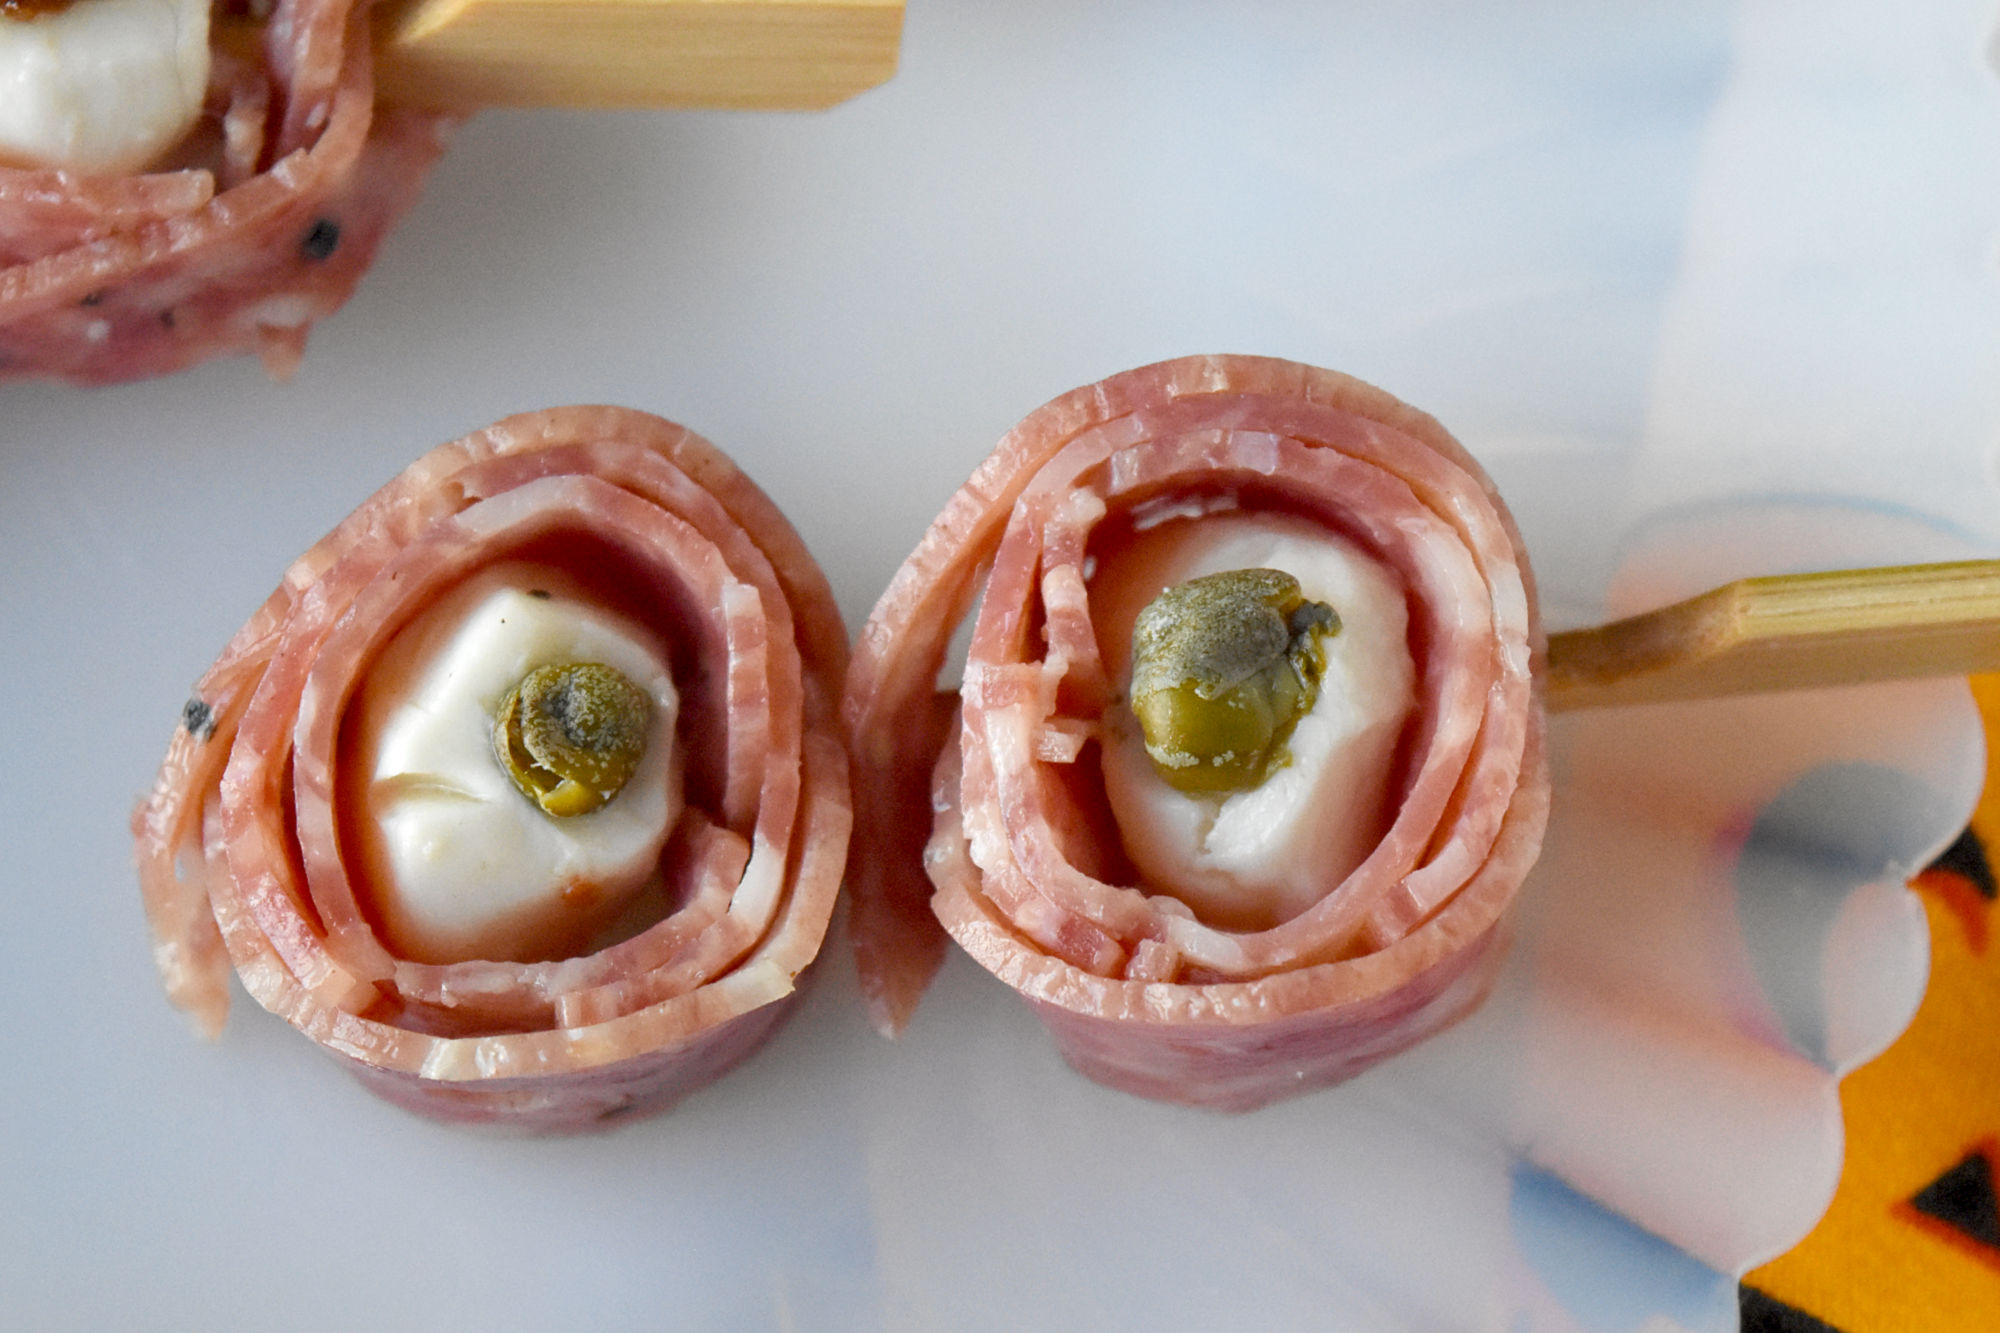 Skewered (Charcuterie) Eyeballs are the perfect centerpiece for your Halloween board! Guaranteed to be the ghostly talk of your Halloween party! ????  #EatDrinkandBeScary #HalloweenTreatsWeek #SpooktacularEats #charcuterie